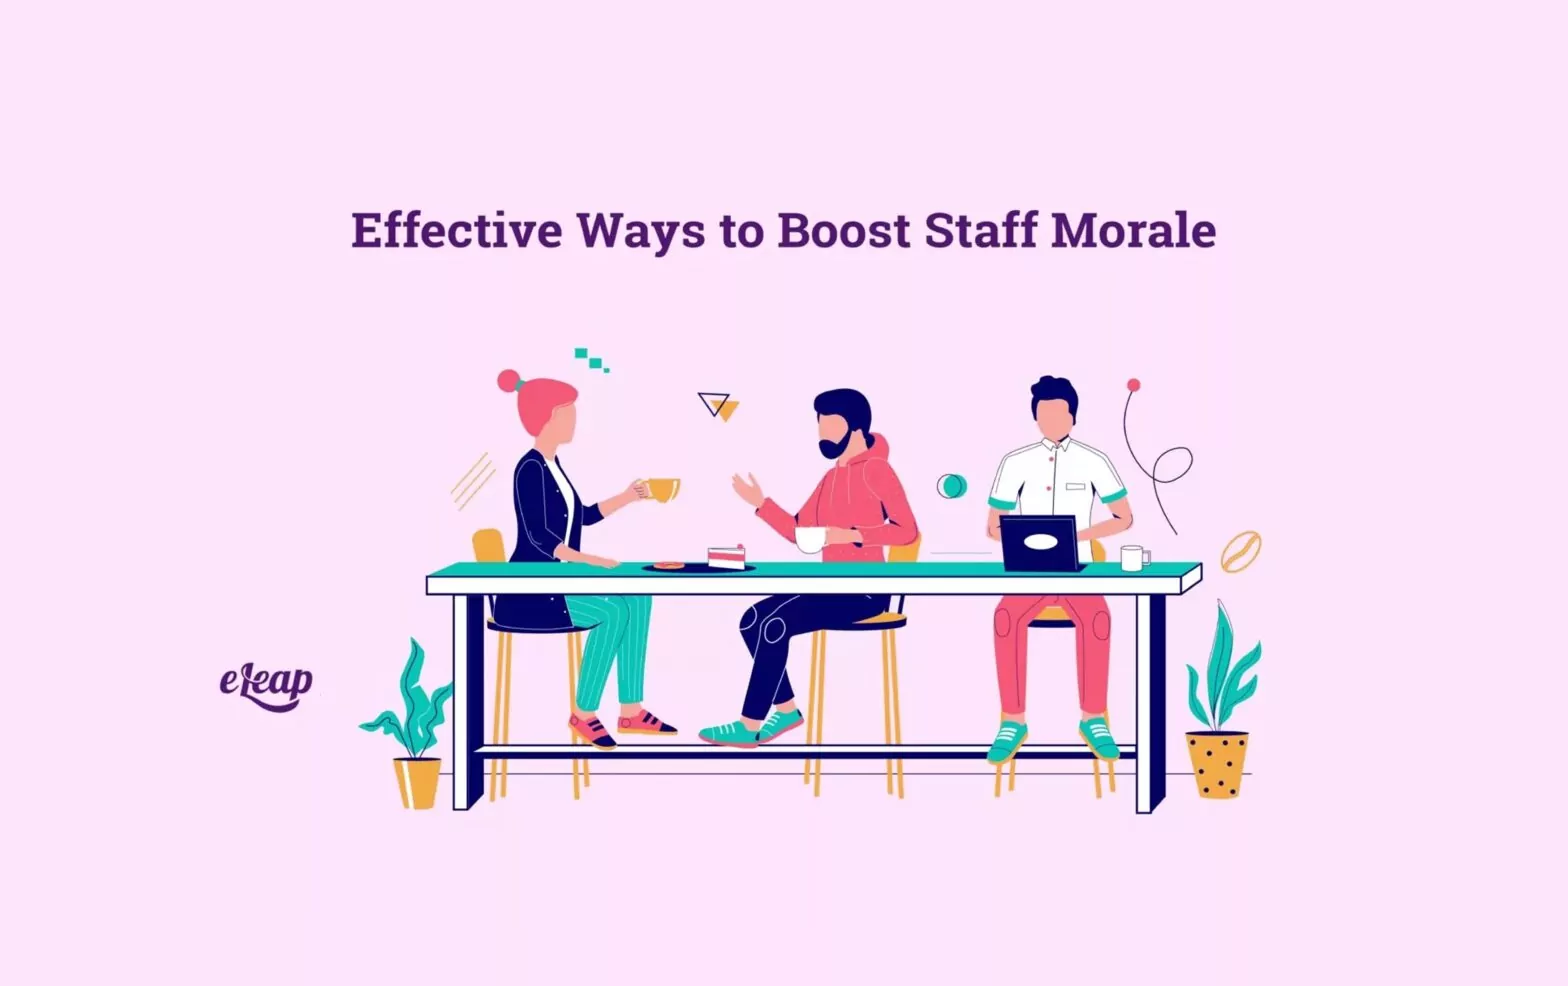 Effective Ways to Boost Staff Morale